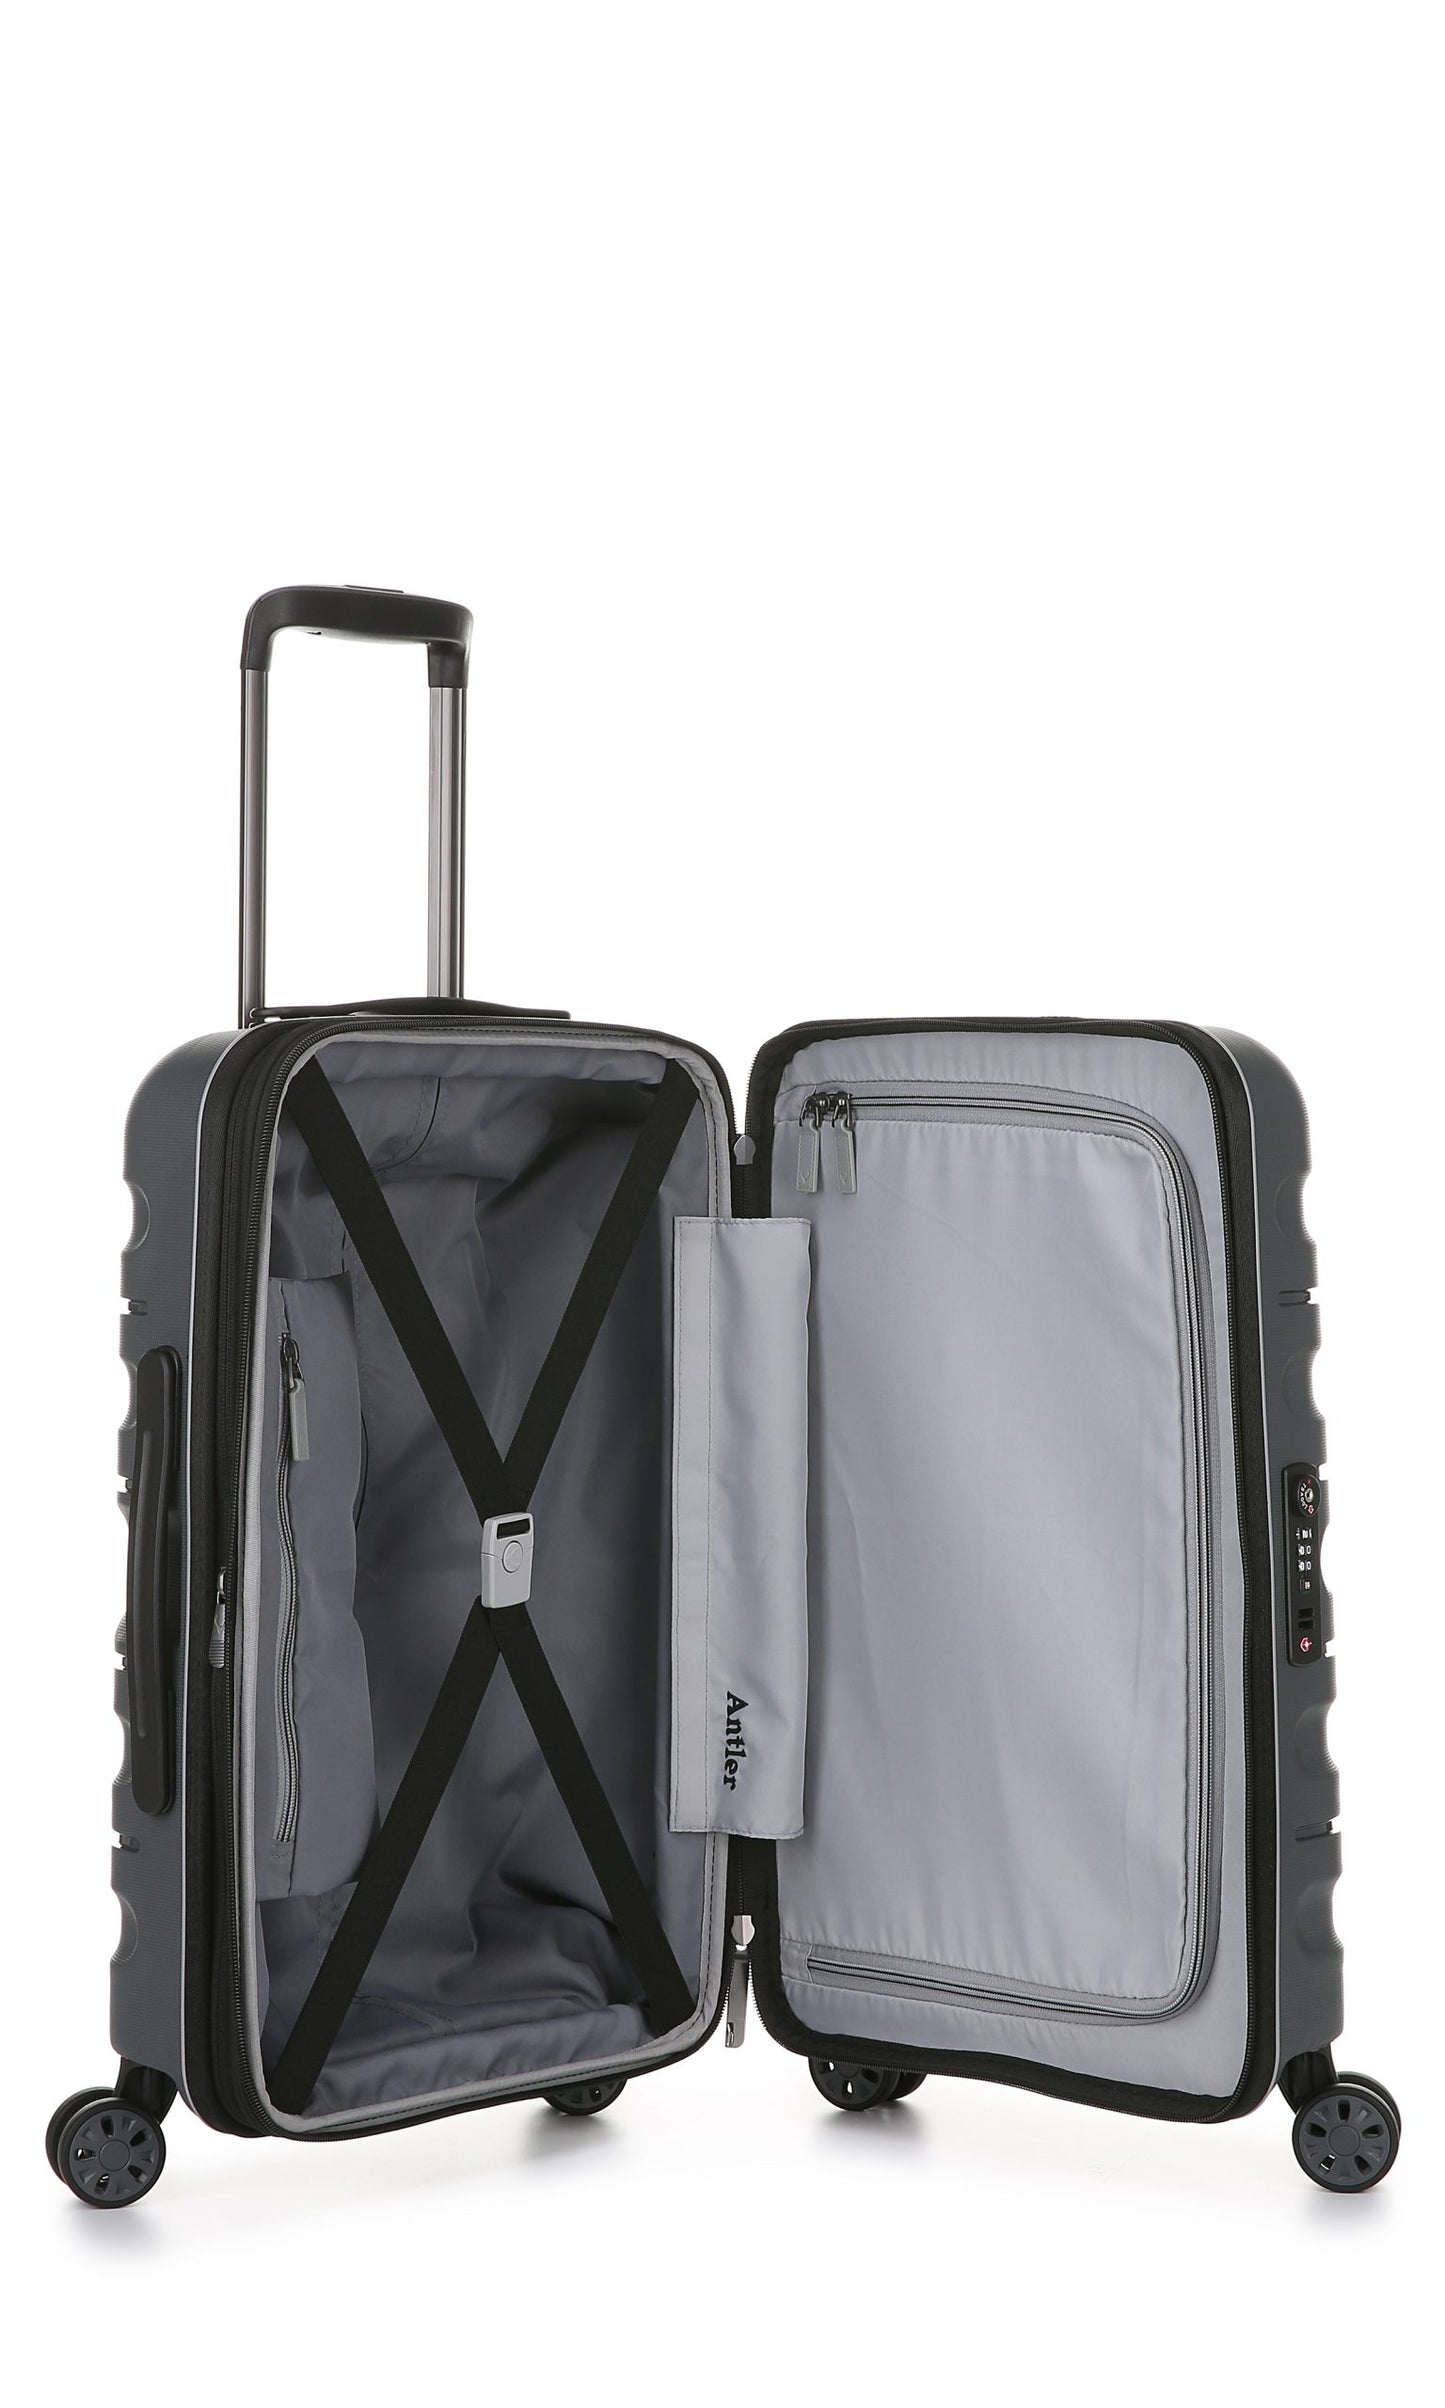 Antler - Lincoln Small 56cm Hardside 4 Wheel Suitcase - Charcoal